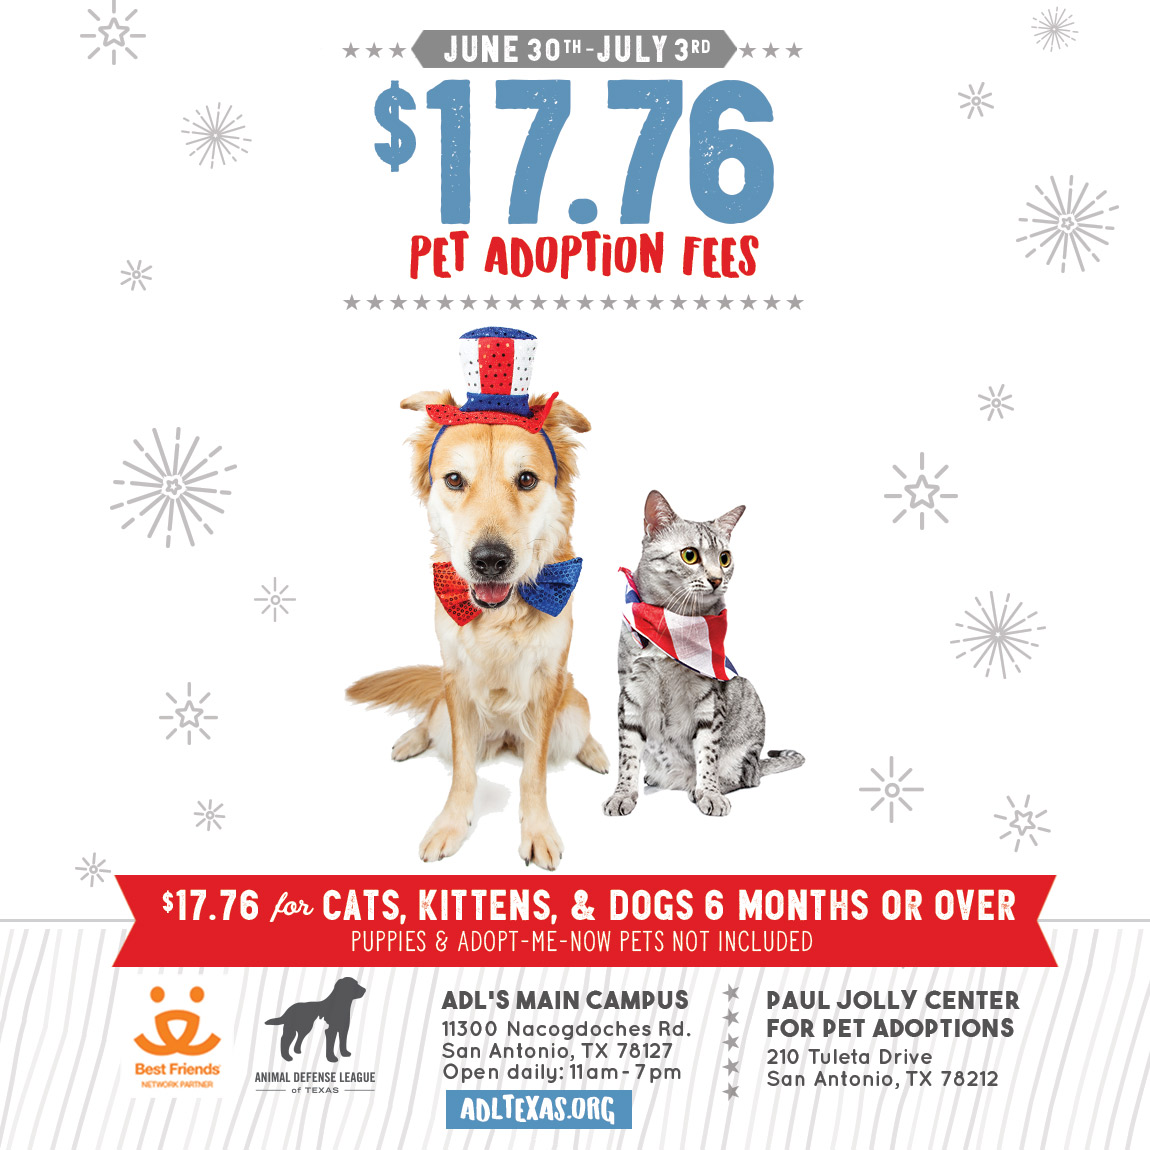 $17.76 Pet Adoption Fees during Independence Day Weekend - June 30th - July 3rd